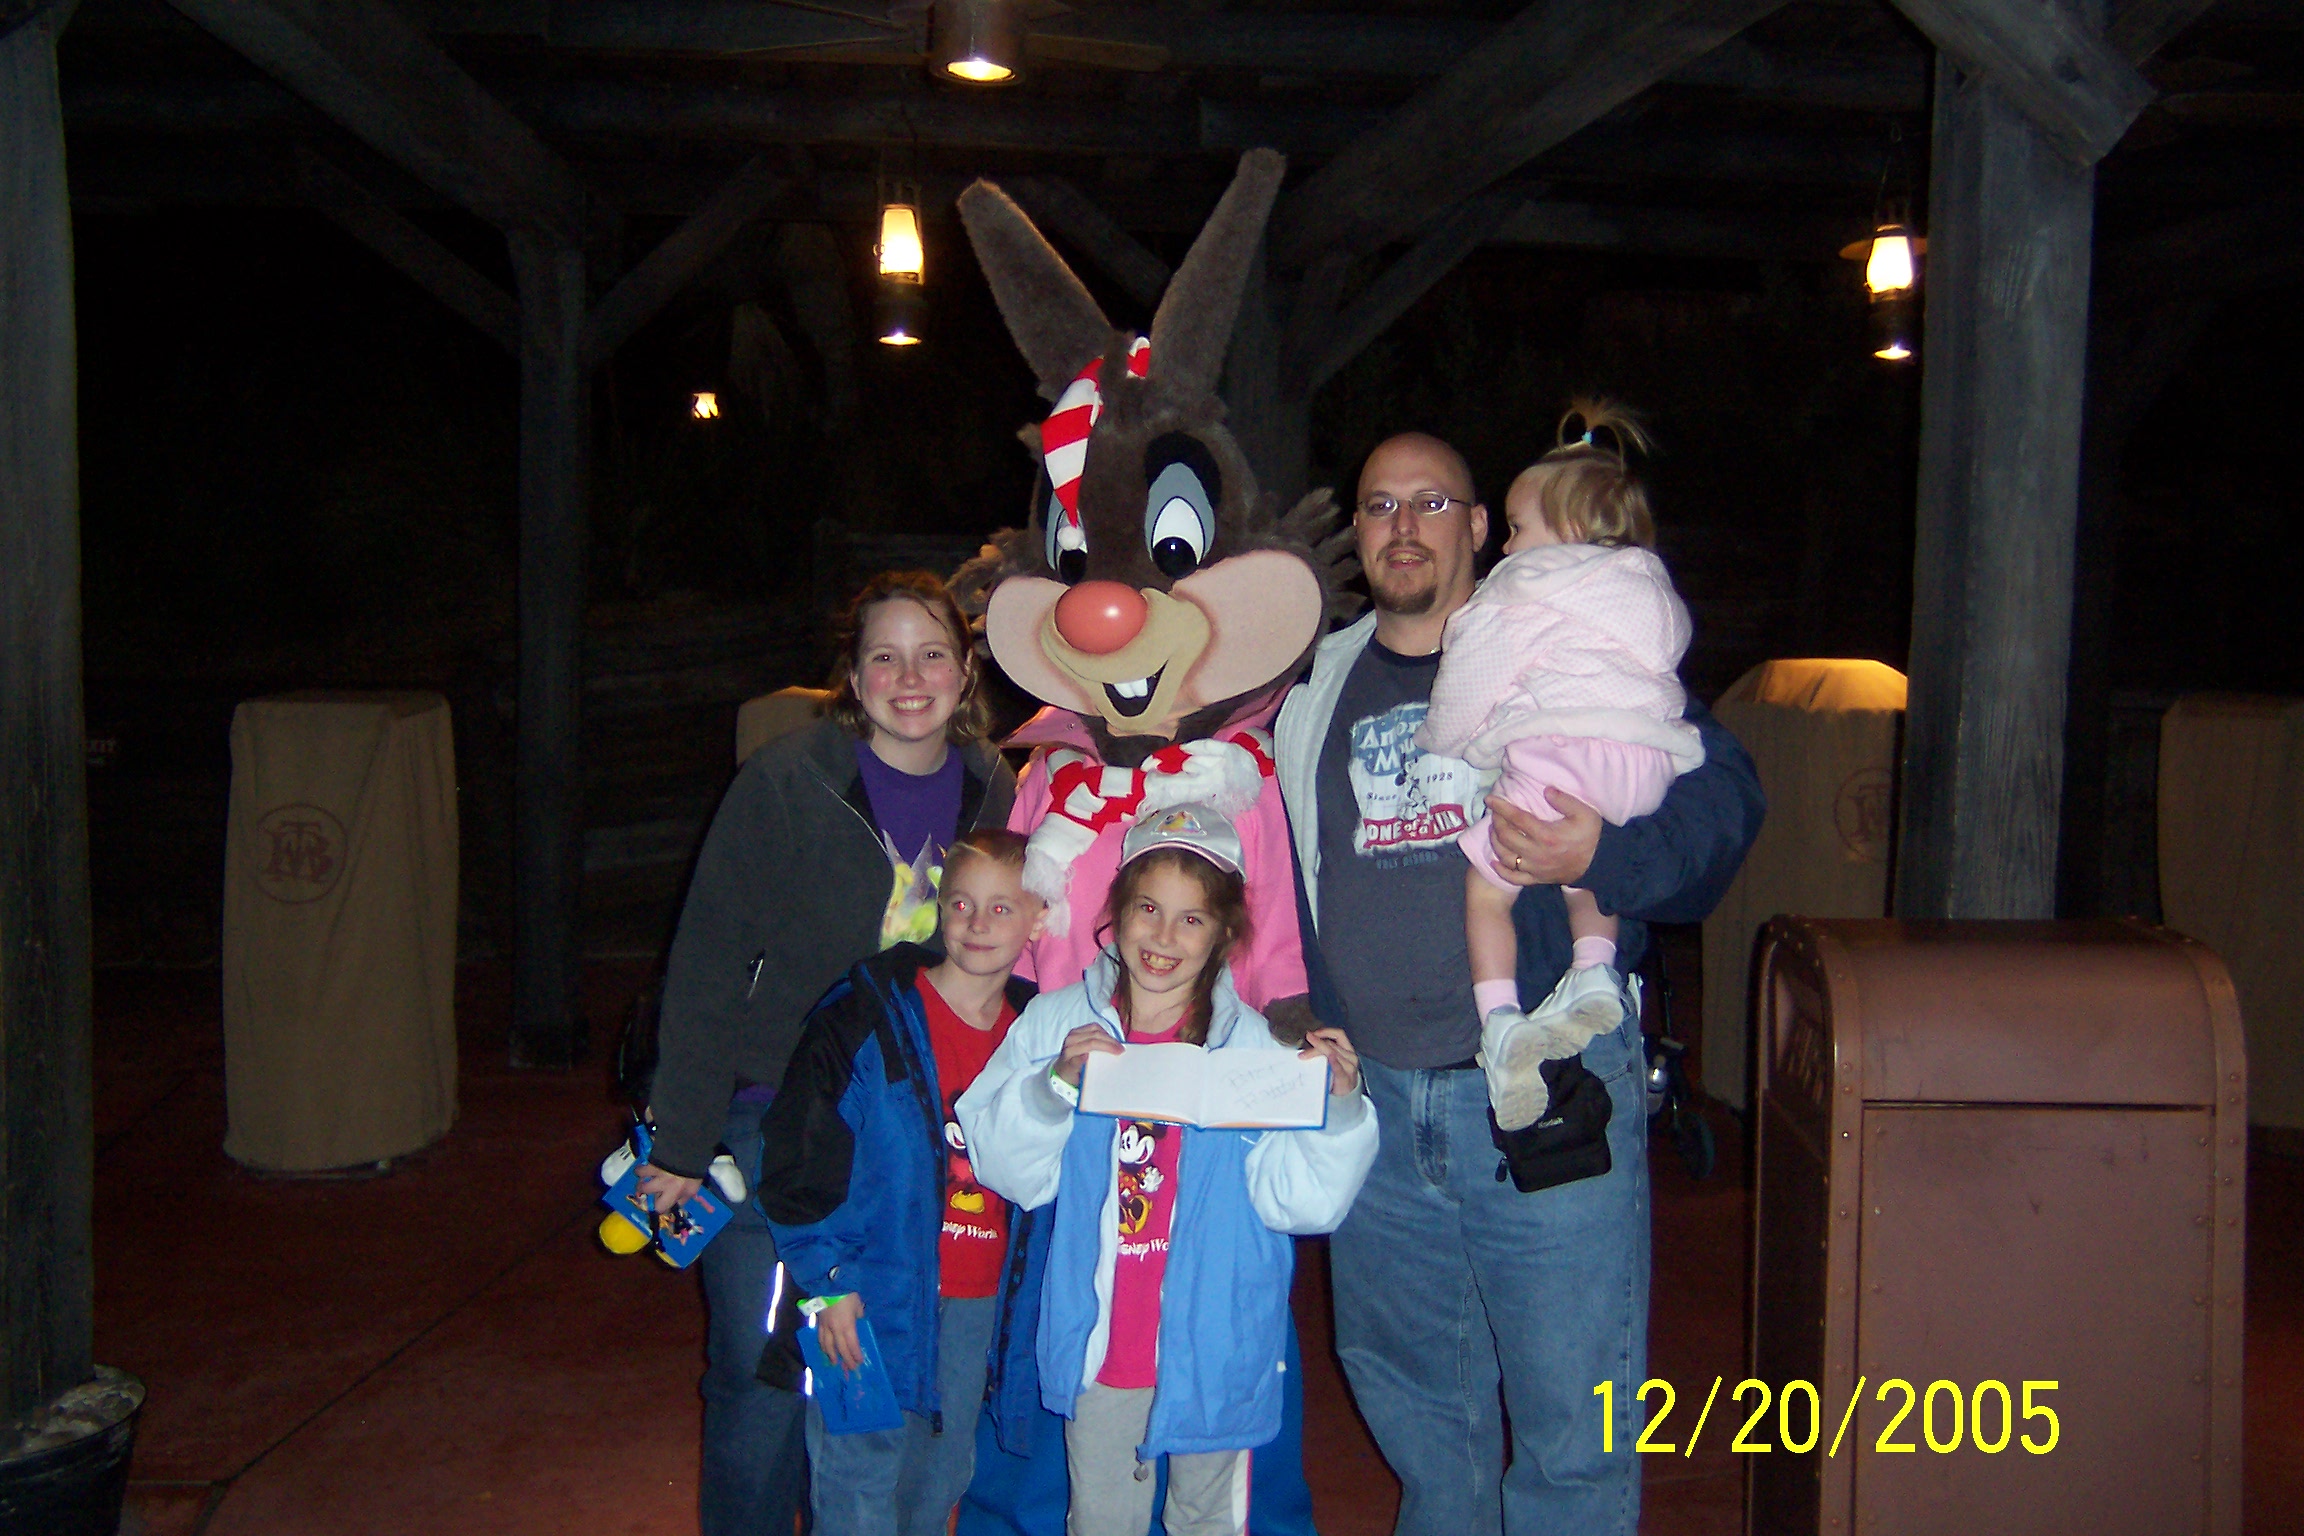 Br'er Rabbit 2005 Christmas Party at the Magic Kingdom